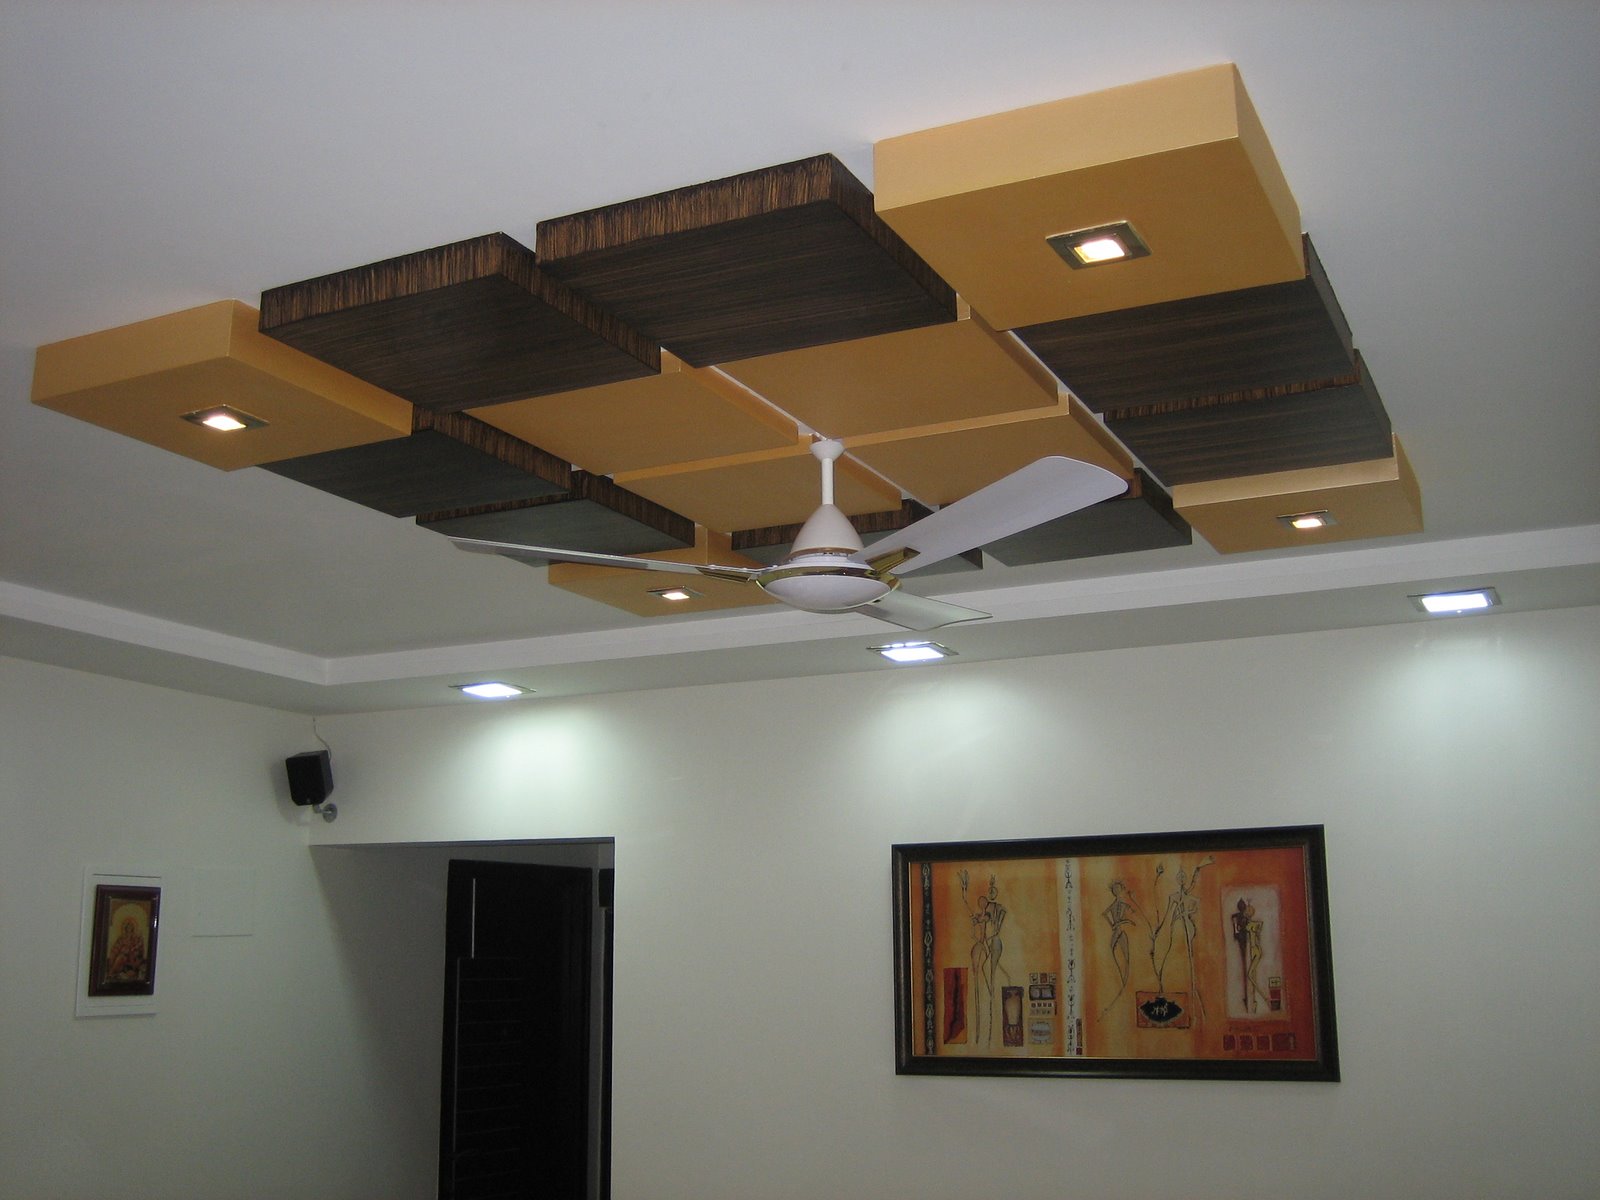 Minimalist Designs Of Roof Ceiling for Simple Design